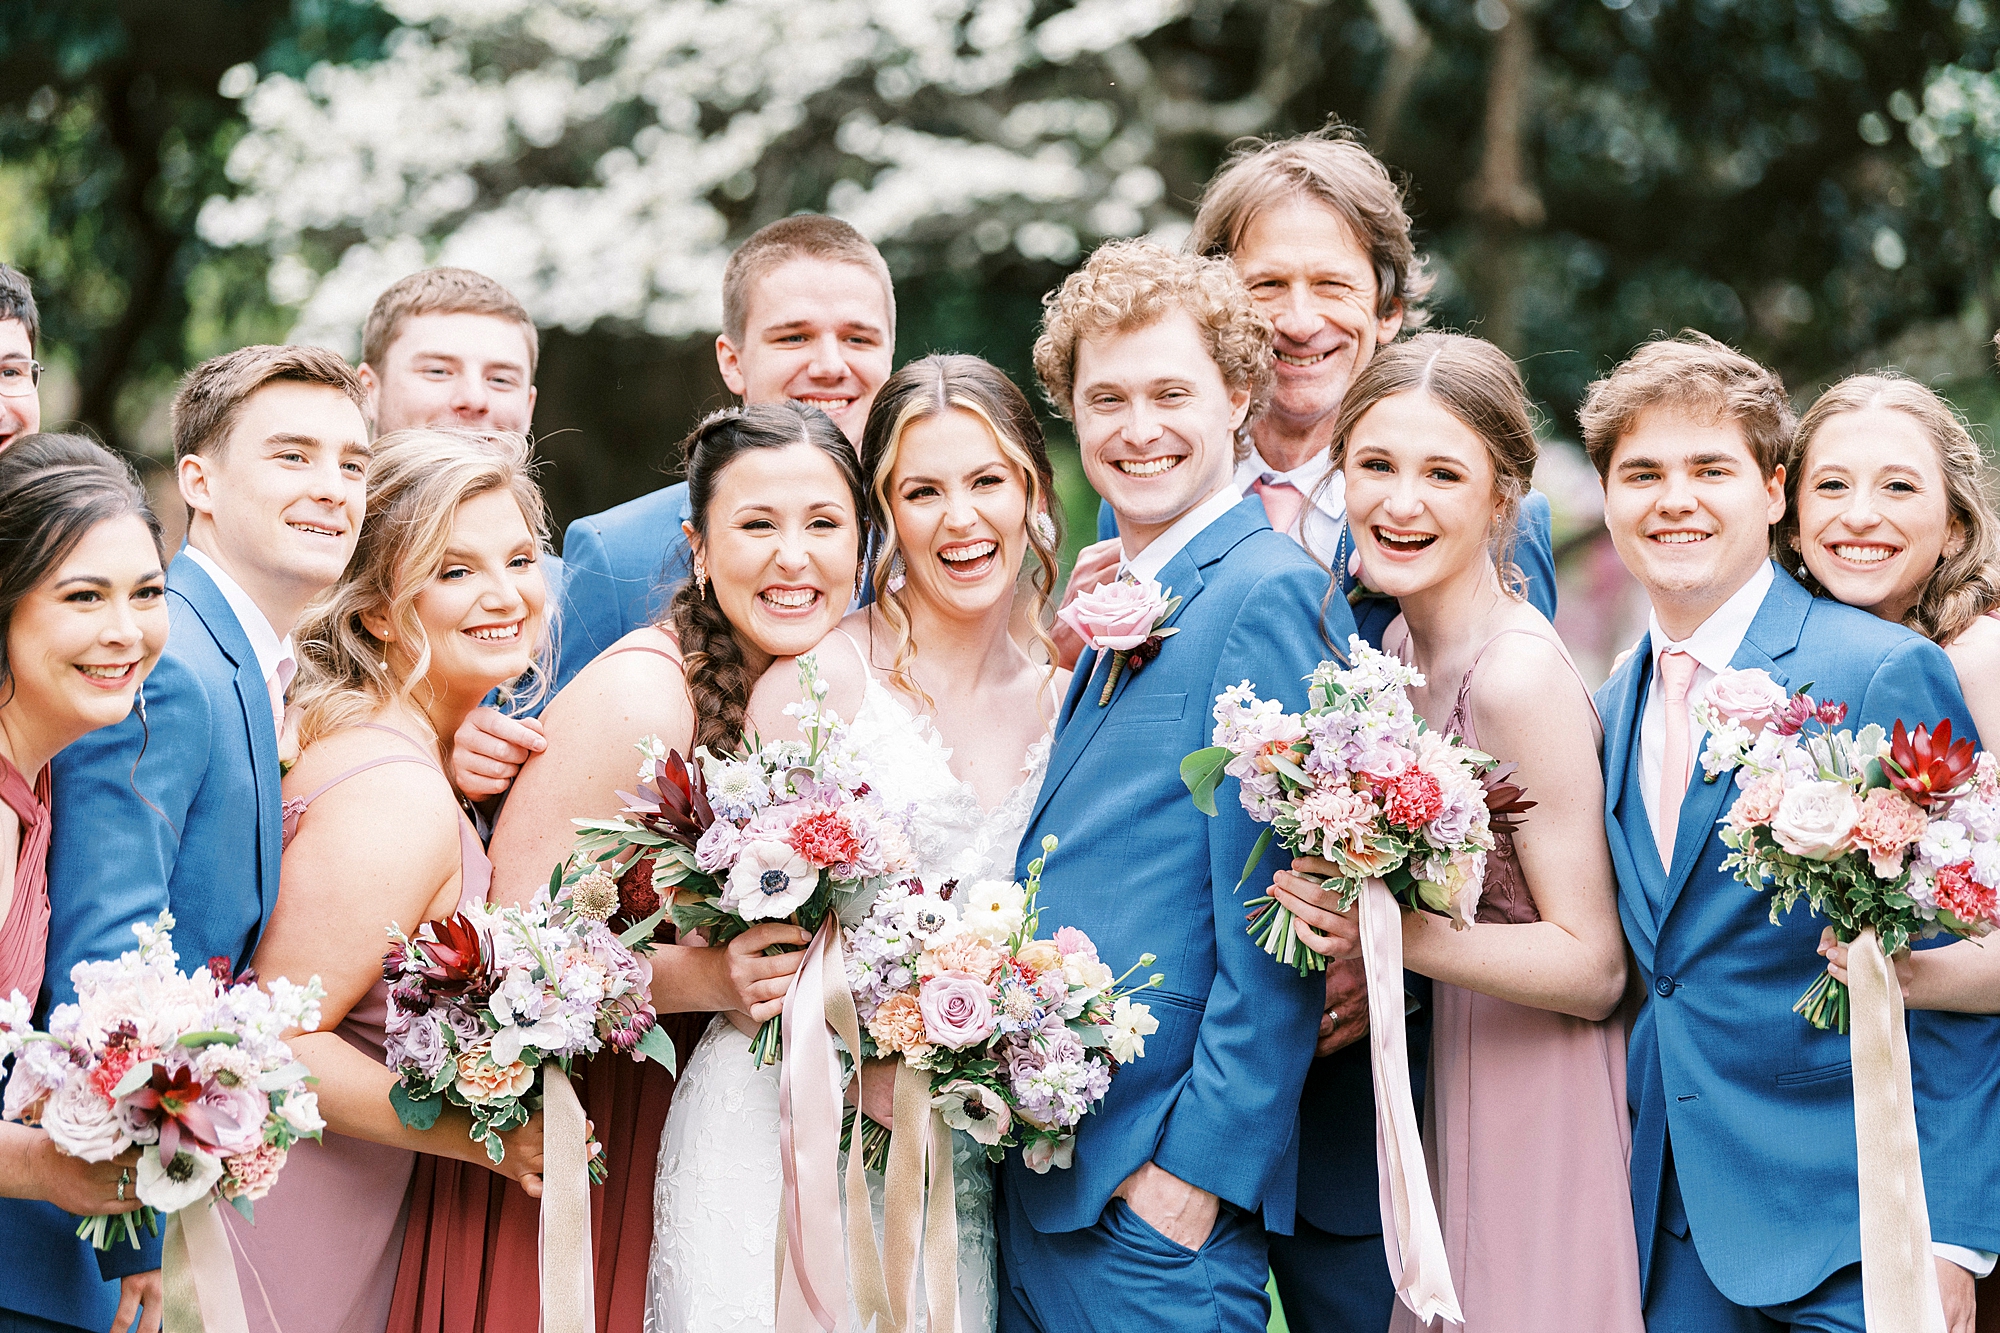 newlyweds hug together with wedding party in blue suits and pink dresses